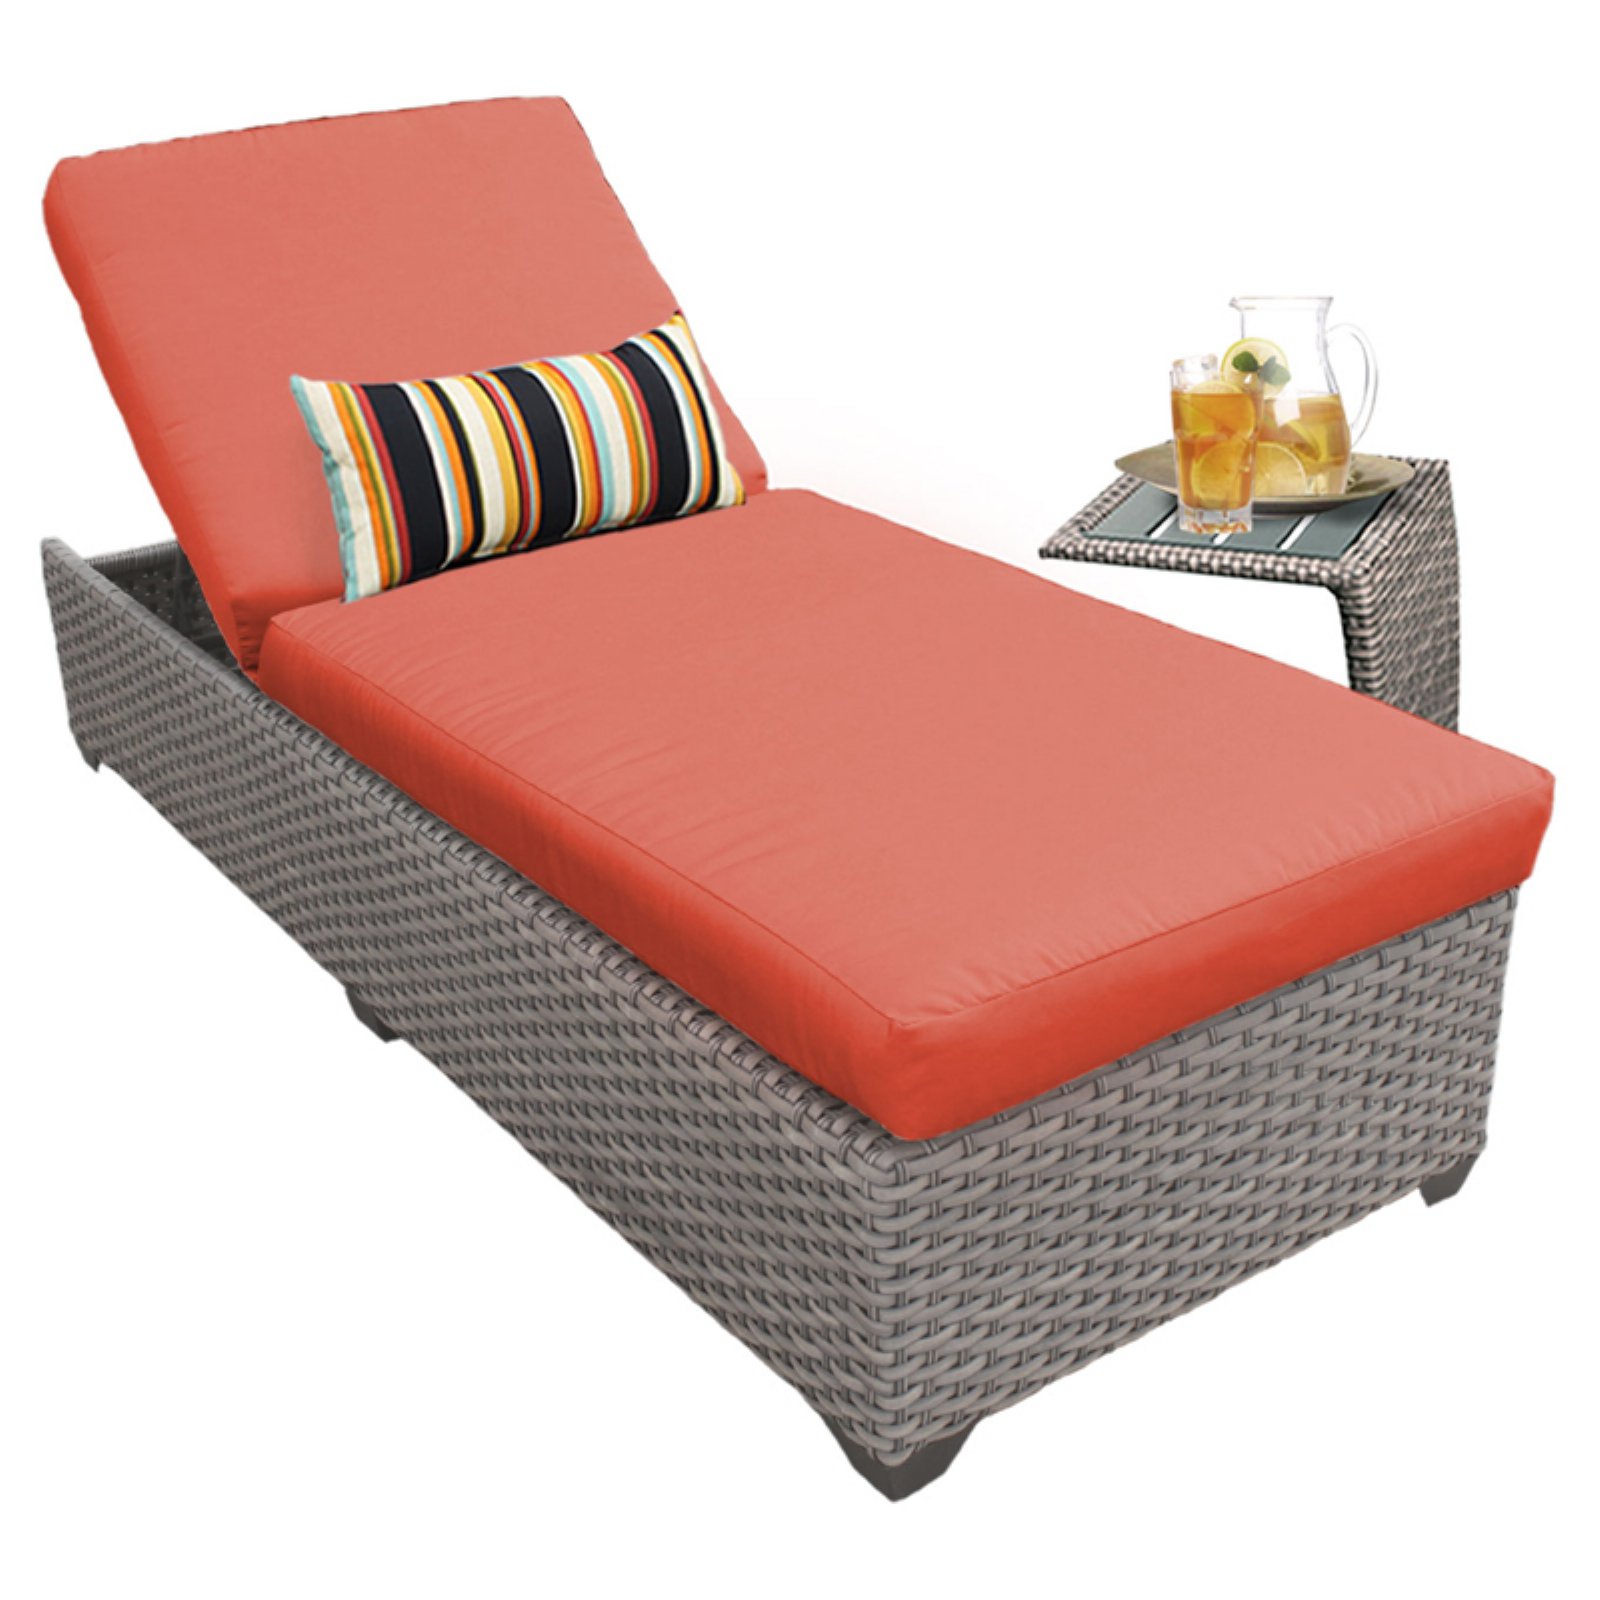 Monterey Patio Furniture Wicker Chaise Lounge - image 1 of 7